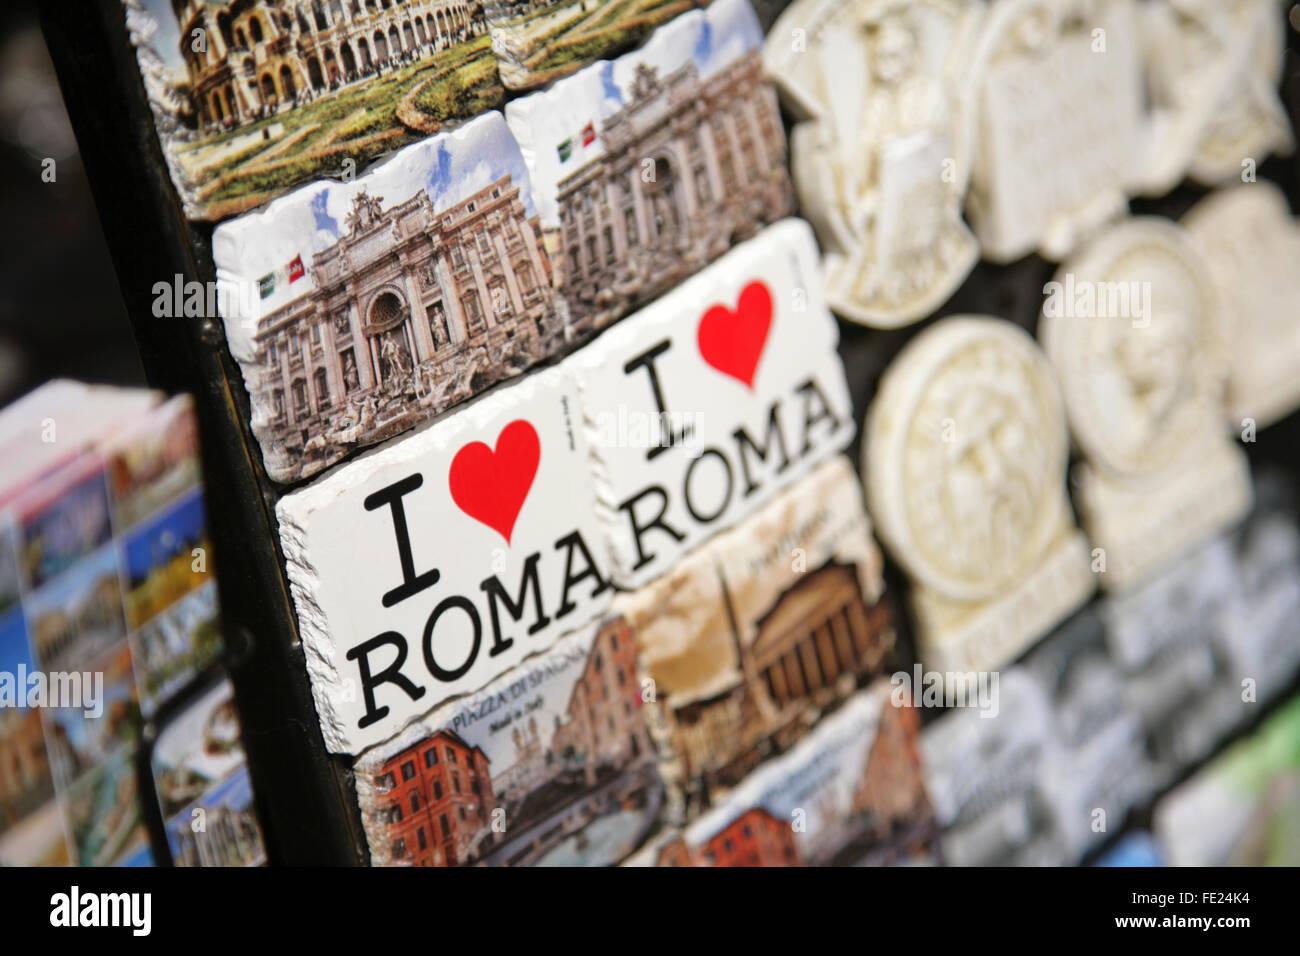 'I Love Roma' and other souvenir fridge magnets on sale, Rome, Italy. Stock Photo